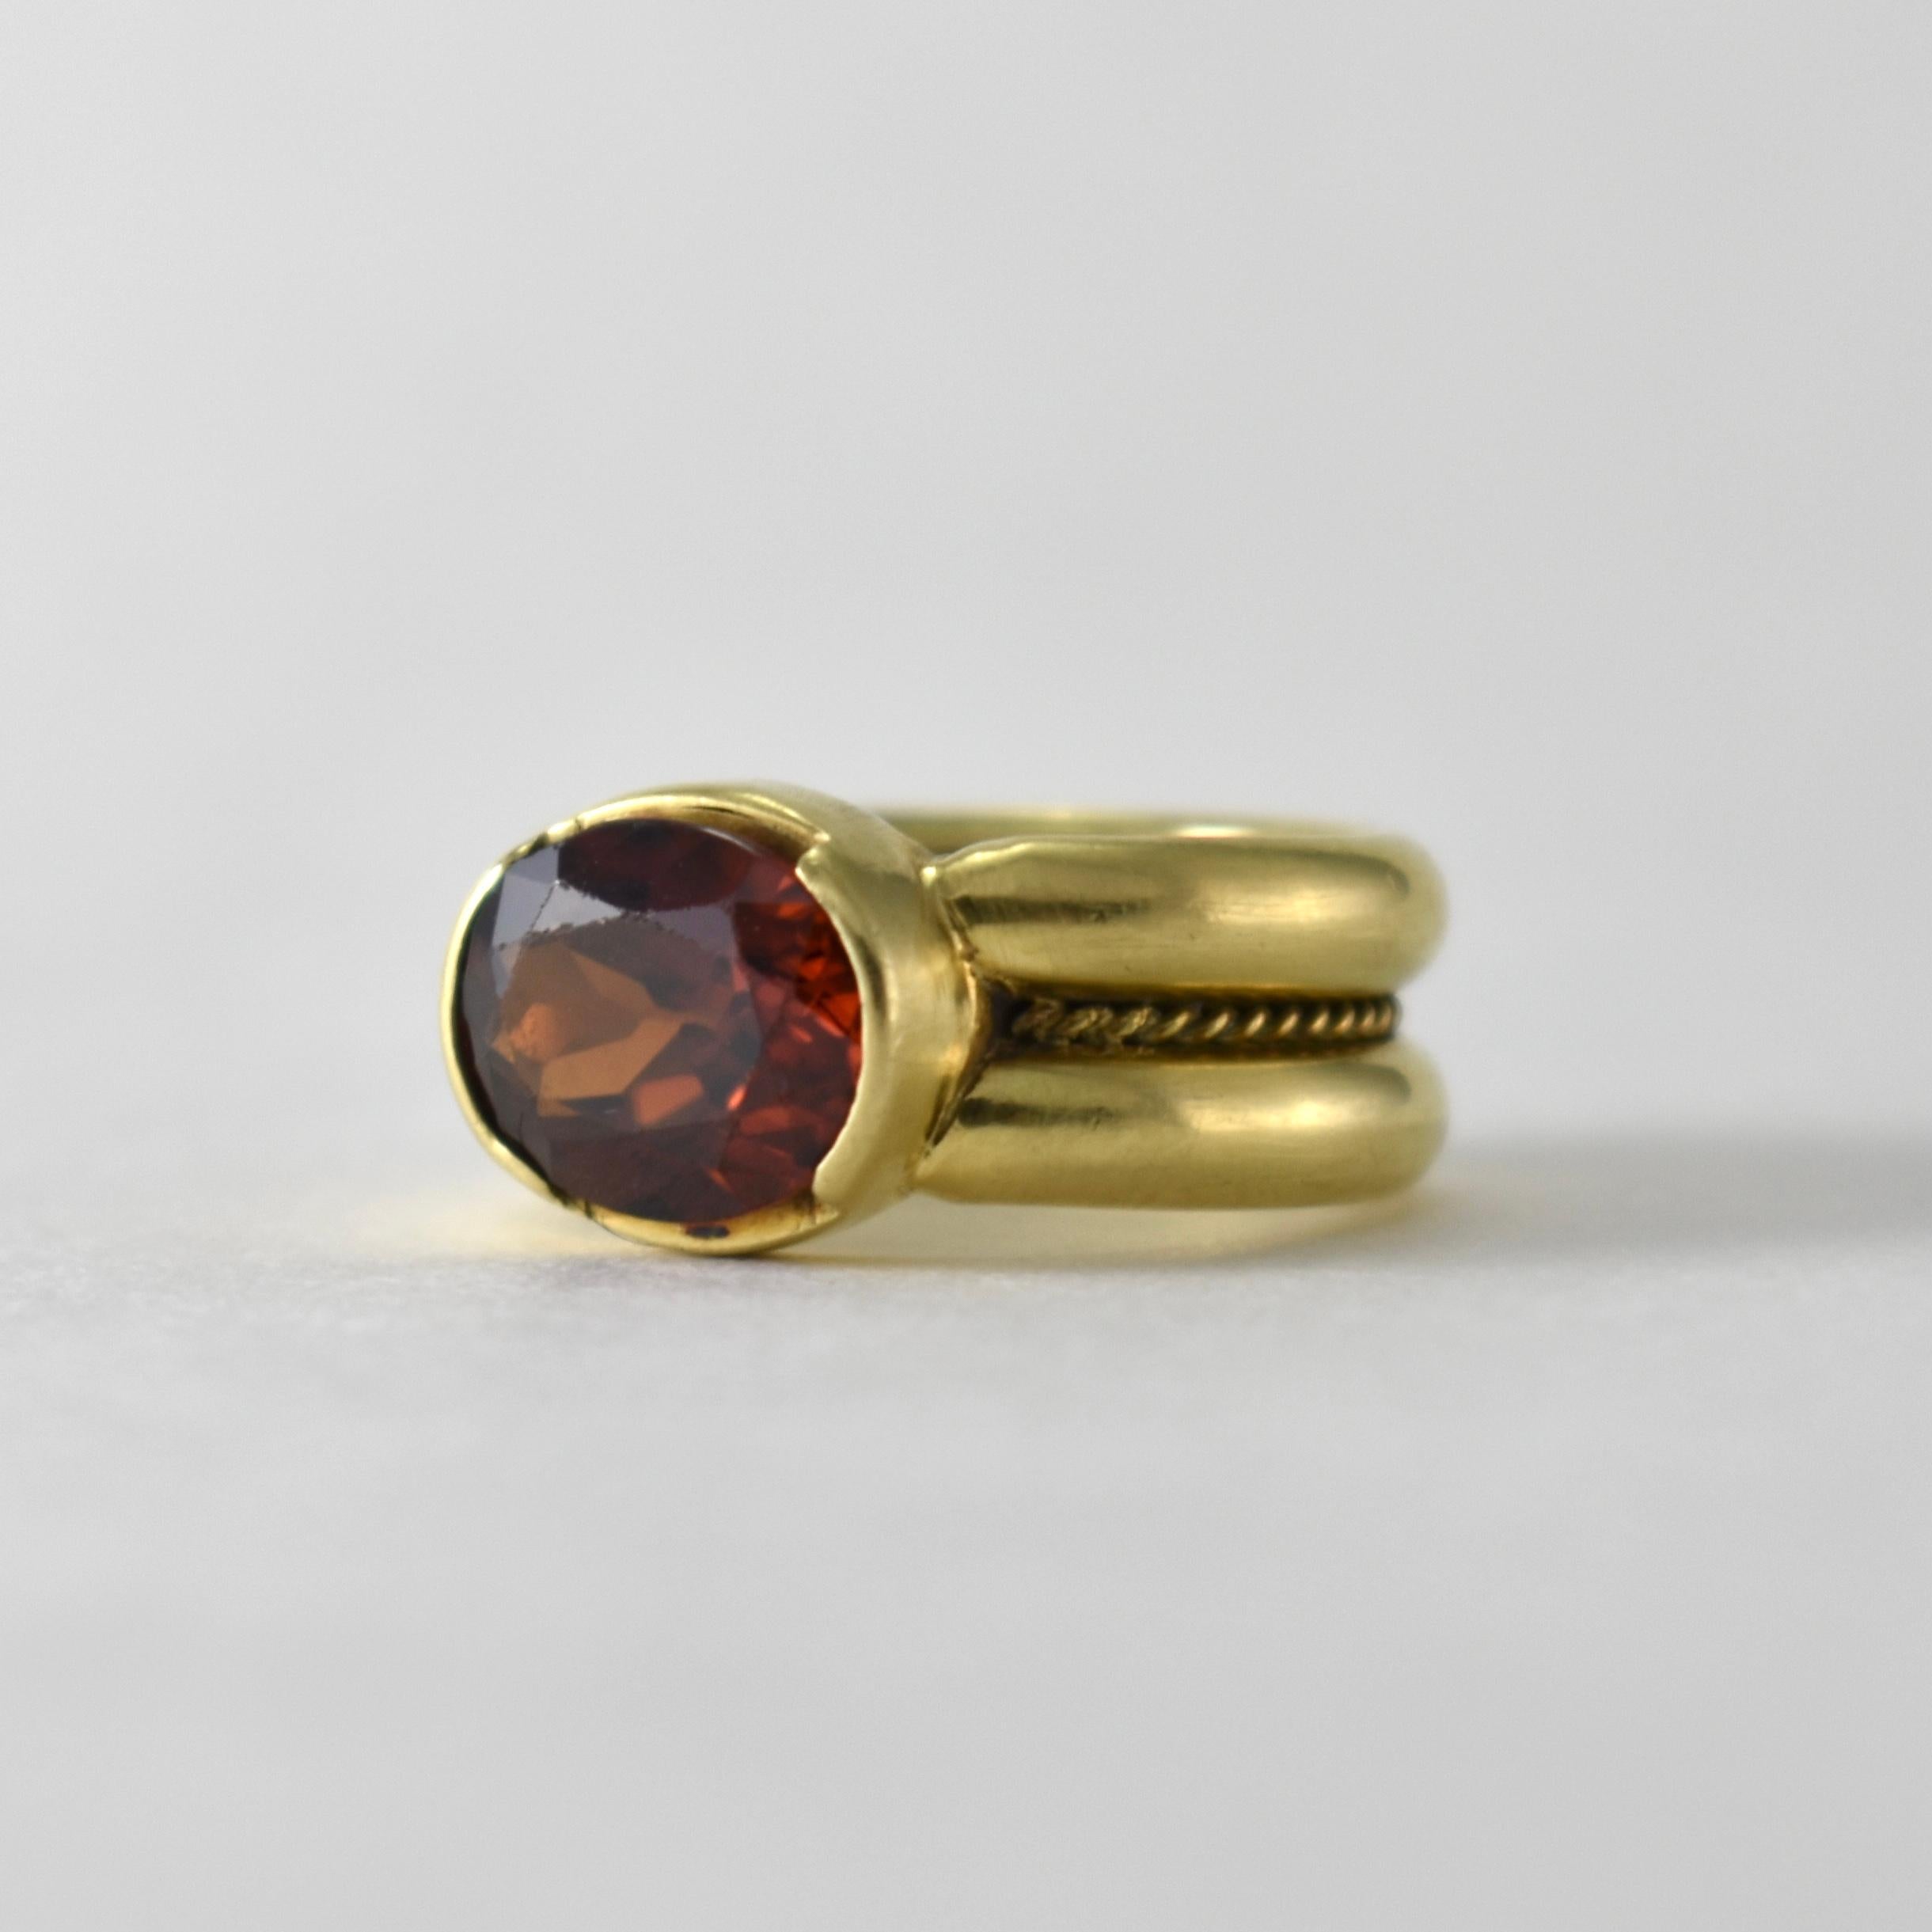 Indulge in the Luxurious Opulence of Lynn K Designs' 18k Royal Yellow Gold Zircon Cocktail Ring

Looking for a statement piece that oozes sophistication and elegance? Look no further than Lynn K Designs' Brown Zircon Cocktail Ring, handcrafted by